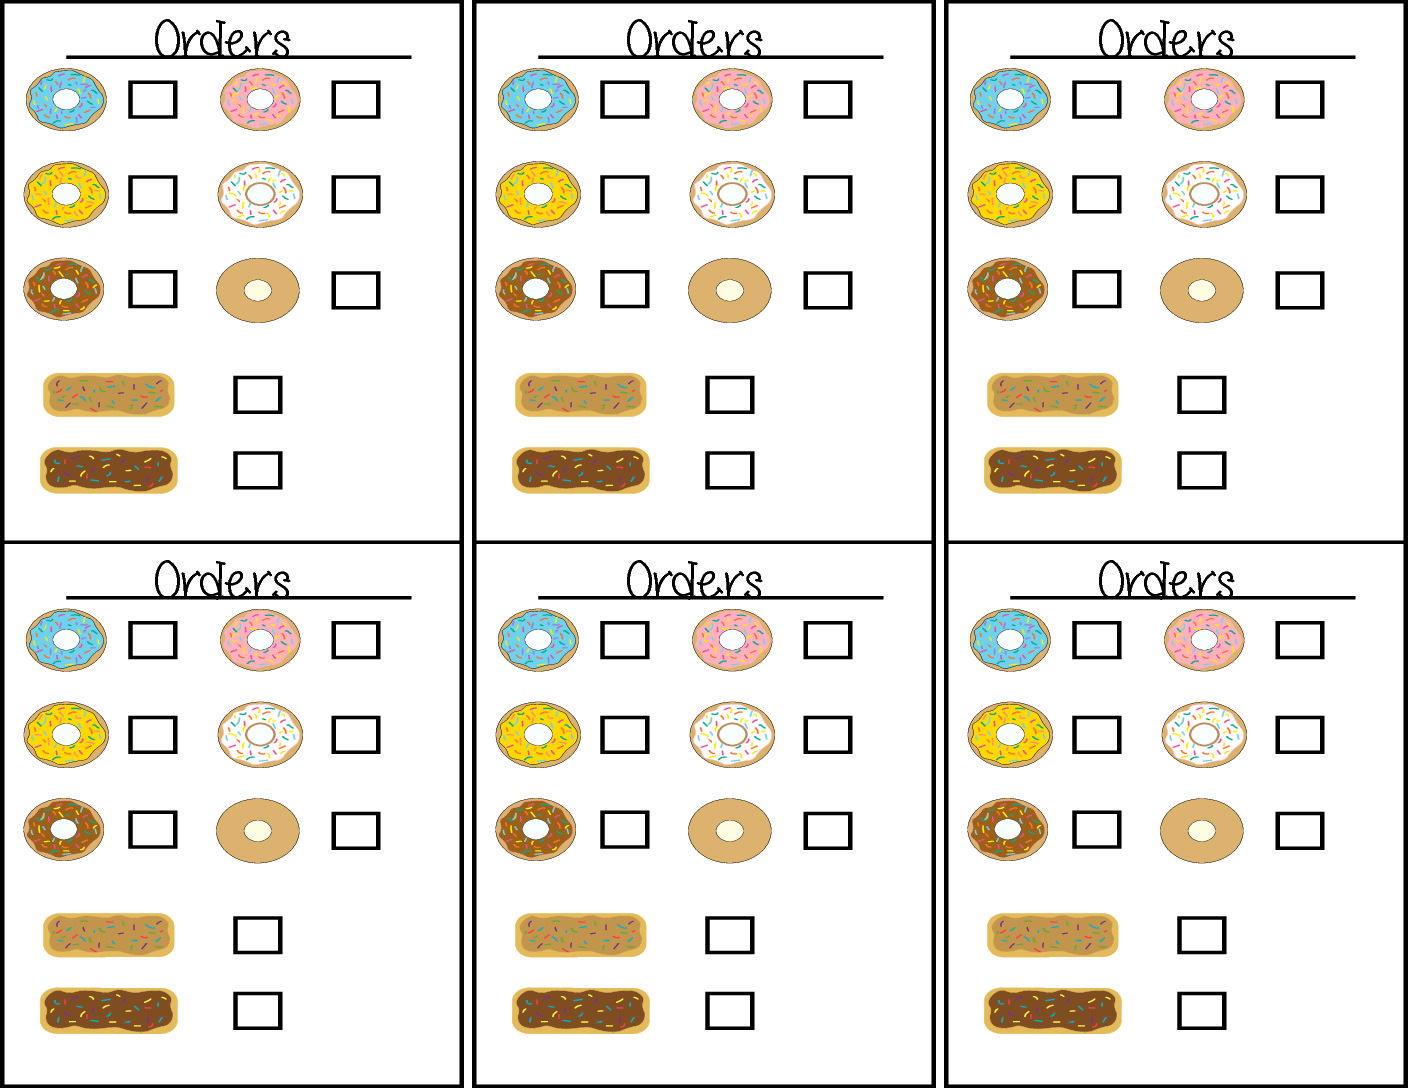 Preschool Dramatic Play Donut Shop Order Forms by Mandy's Party Printables